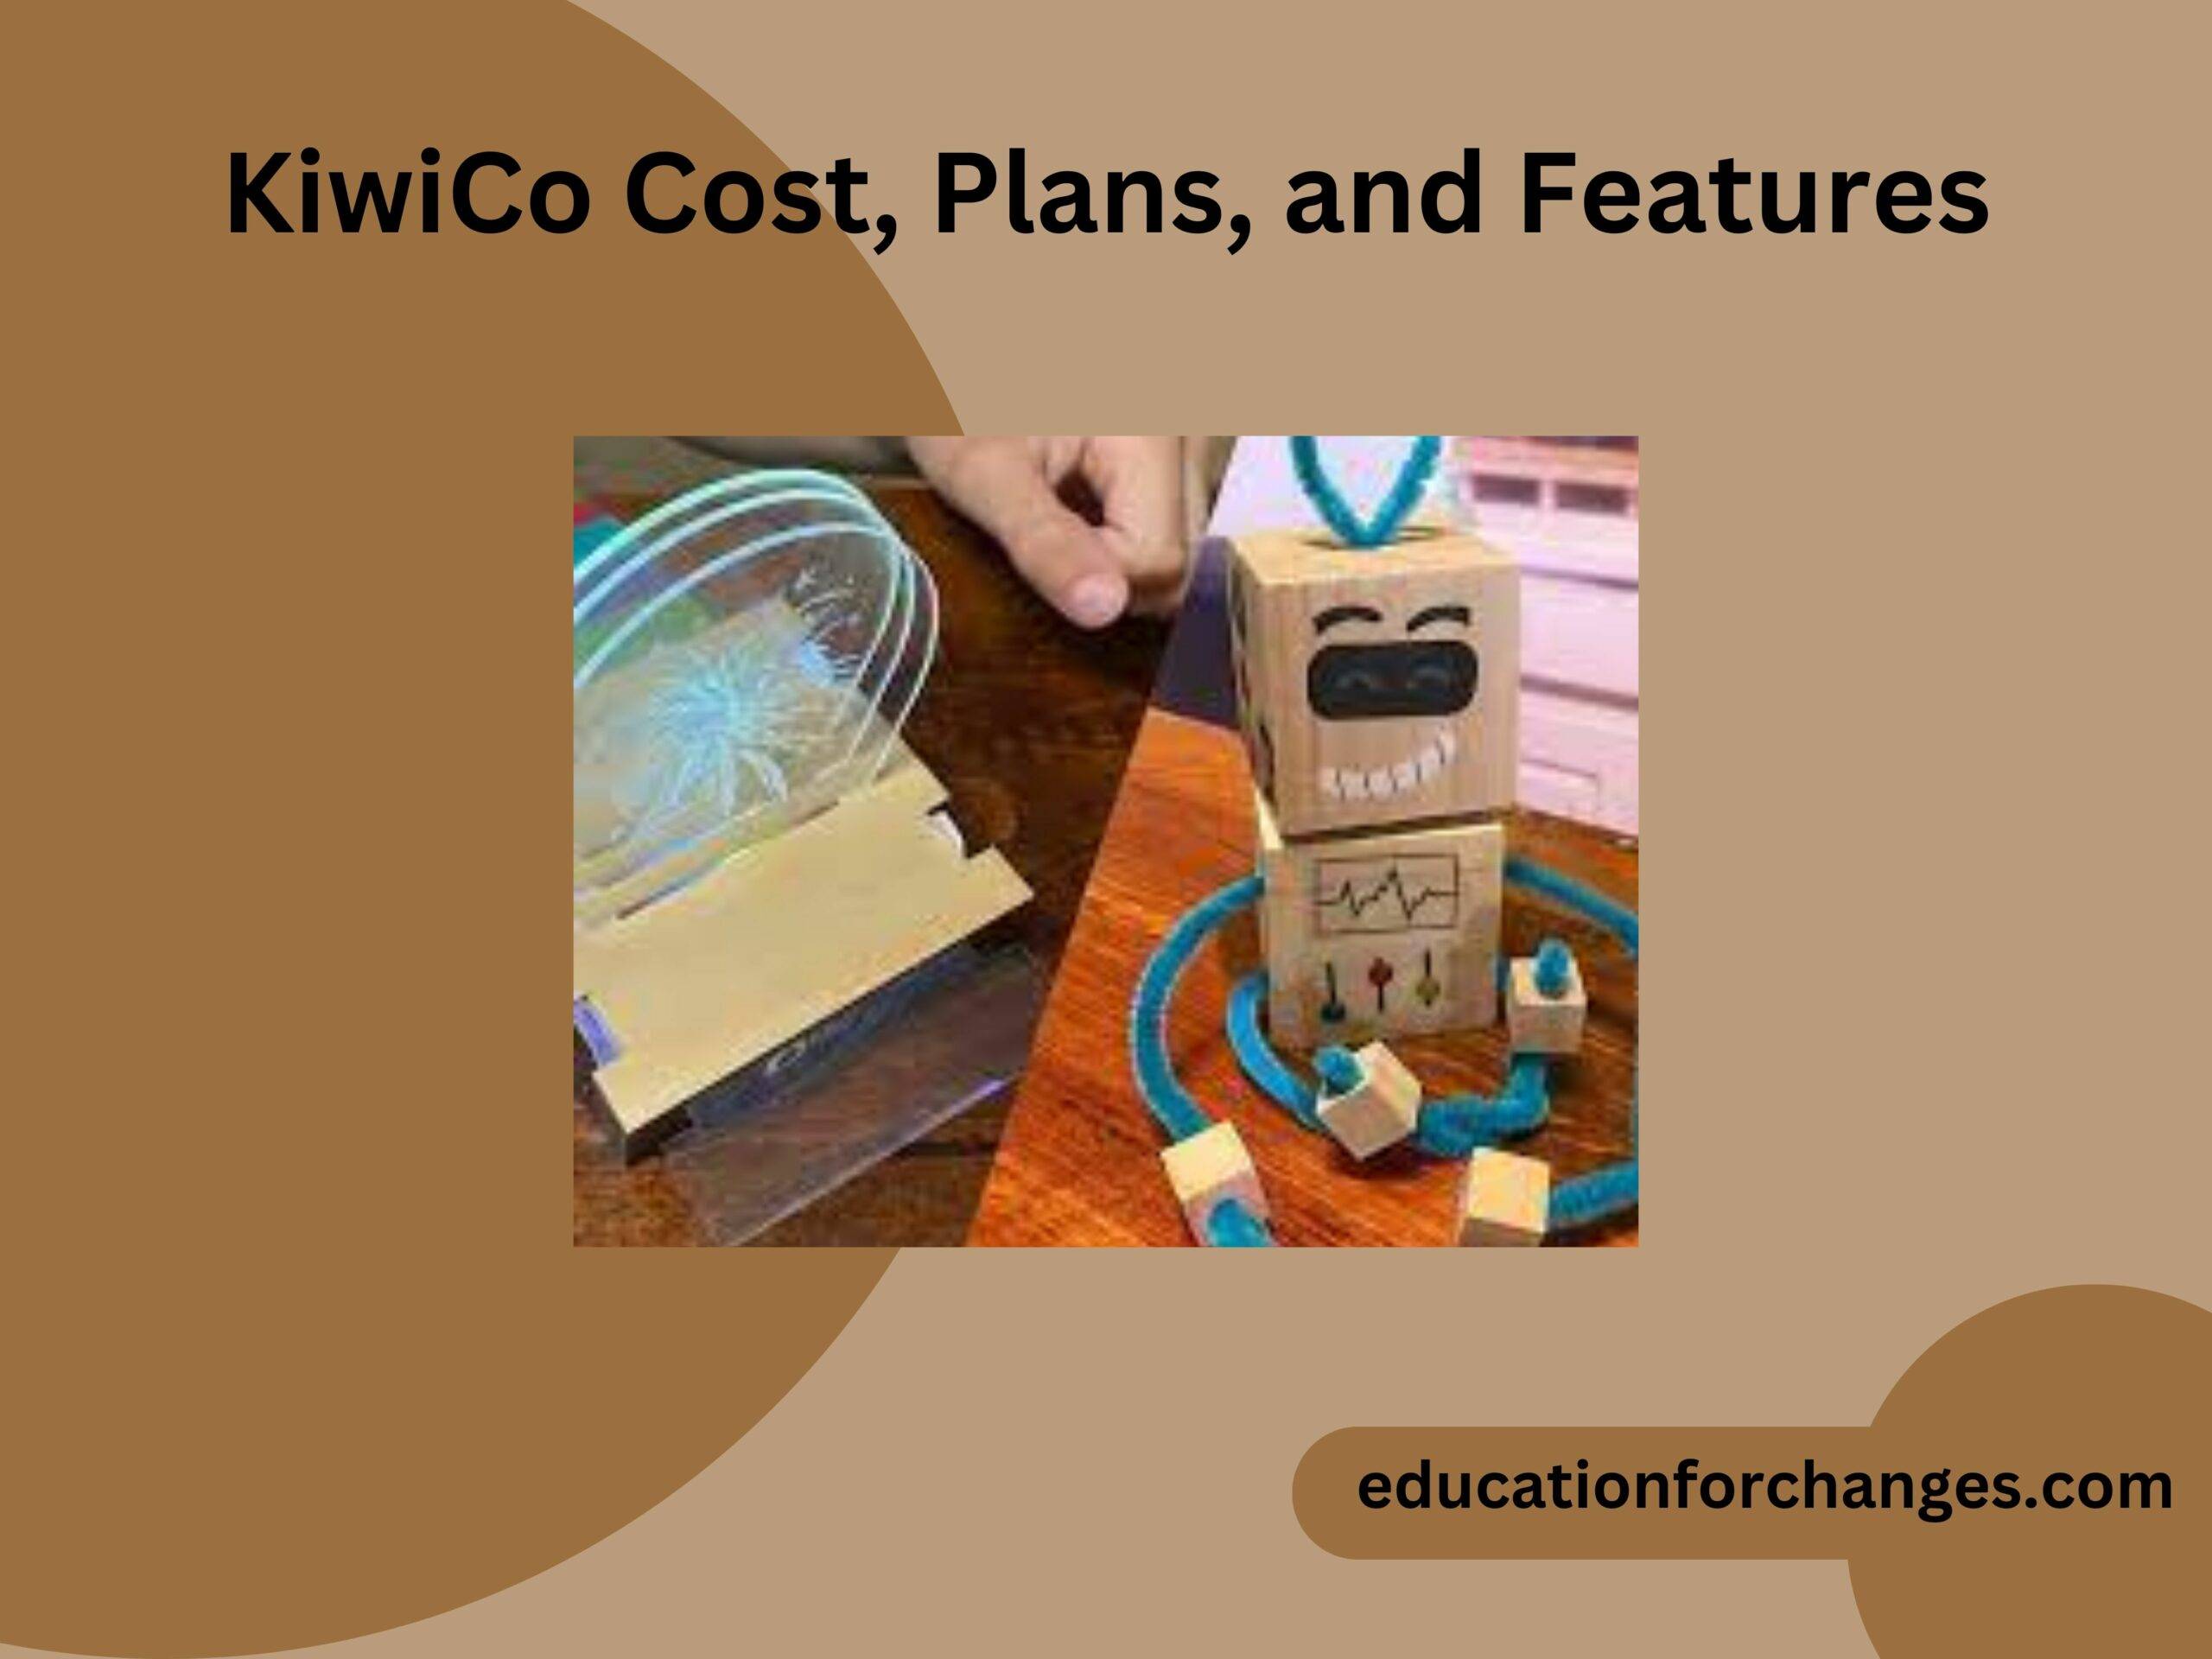 KiwiCo Cost, Plans, and Features